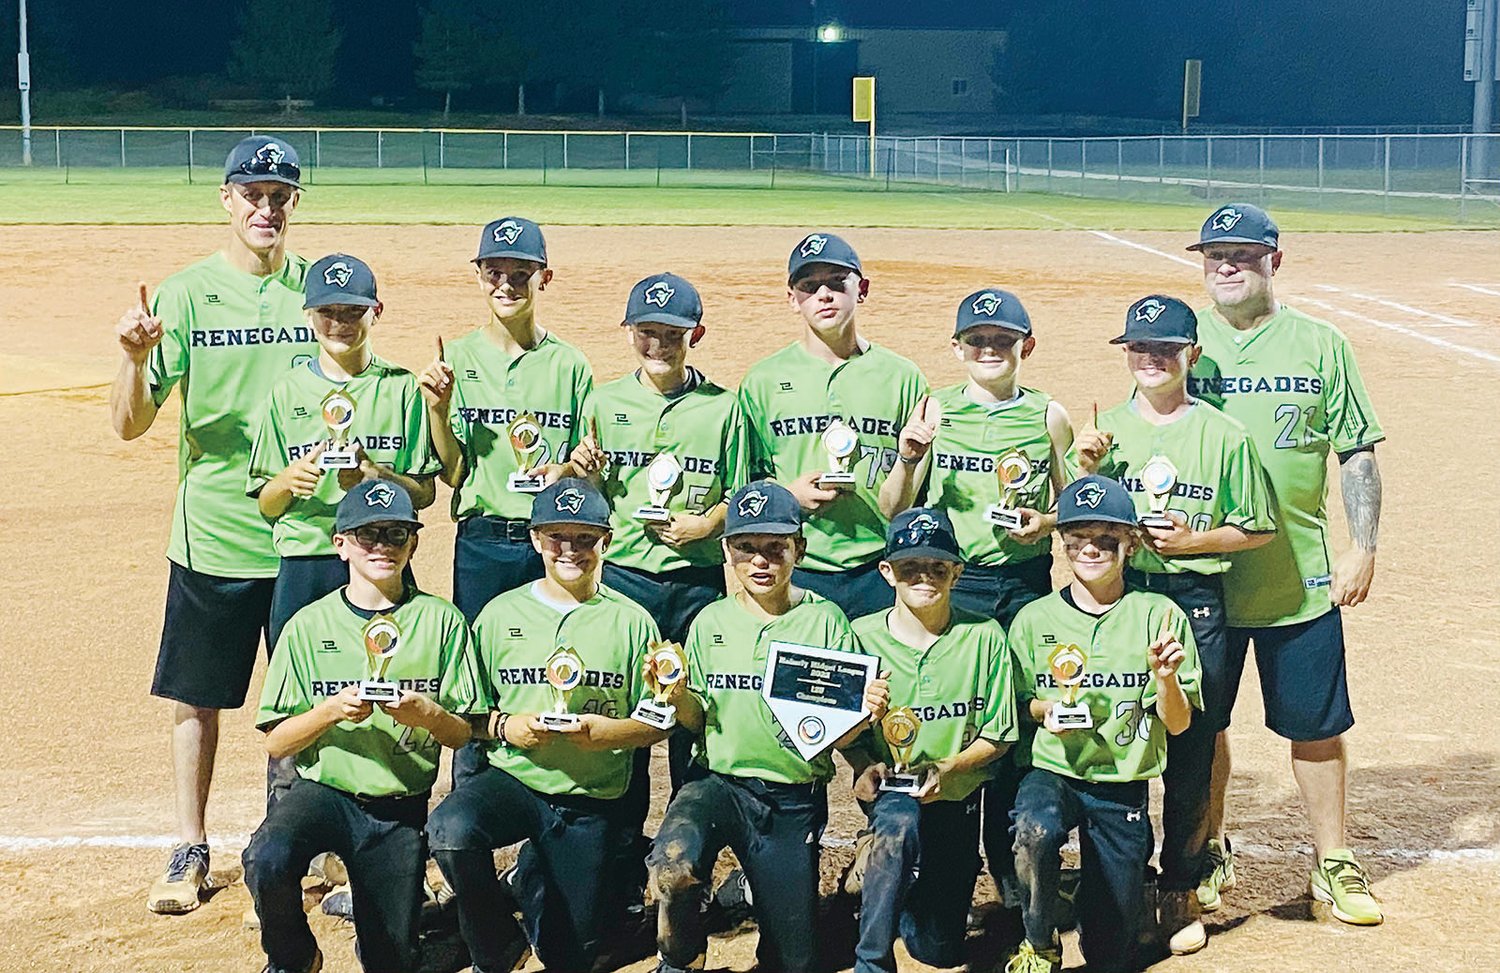 The Renegades, based in Marceline, won the 12-under tournament championship in the Moberly Midget League this past July. The Renegades went 11-1 during the regular season, scoring 160 runs while allowing 43. Here’s the team. Front row (from left), Alex Ewigman, Jase Ewigman, Max Evans, Tayte Ewigman and Owen Thomas. Back row, assistant coach Willie Ewigman, Harper Van Zee, Nolan Green, Justin Rowe, Markos Black, Trace Terrell, Zane Svendsen and head coach Matt Thomas.